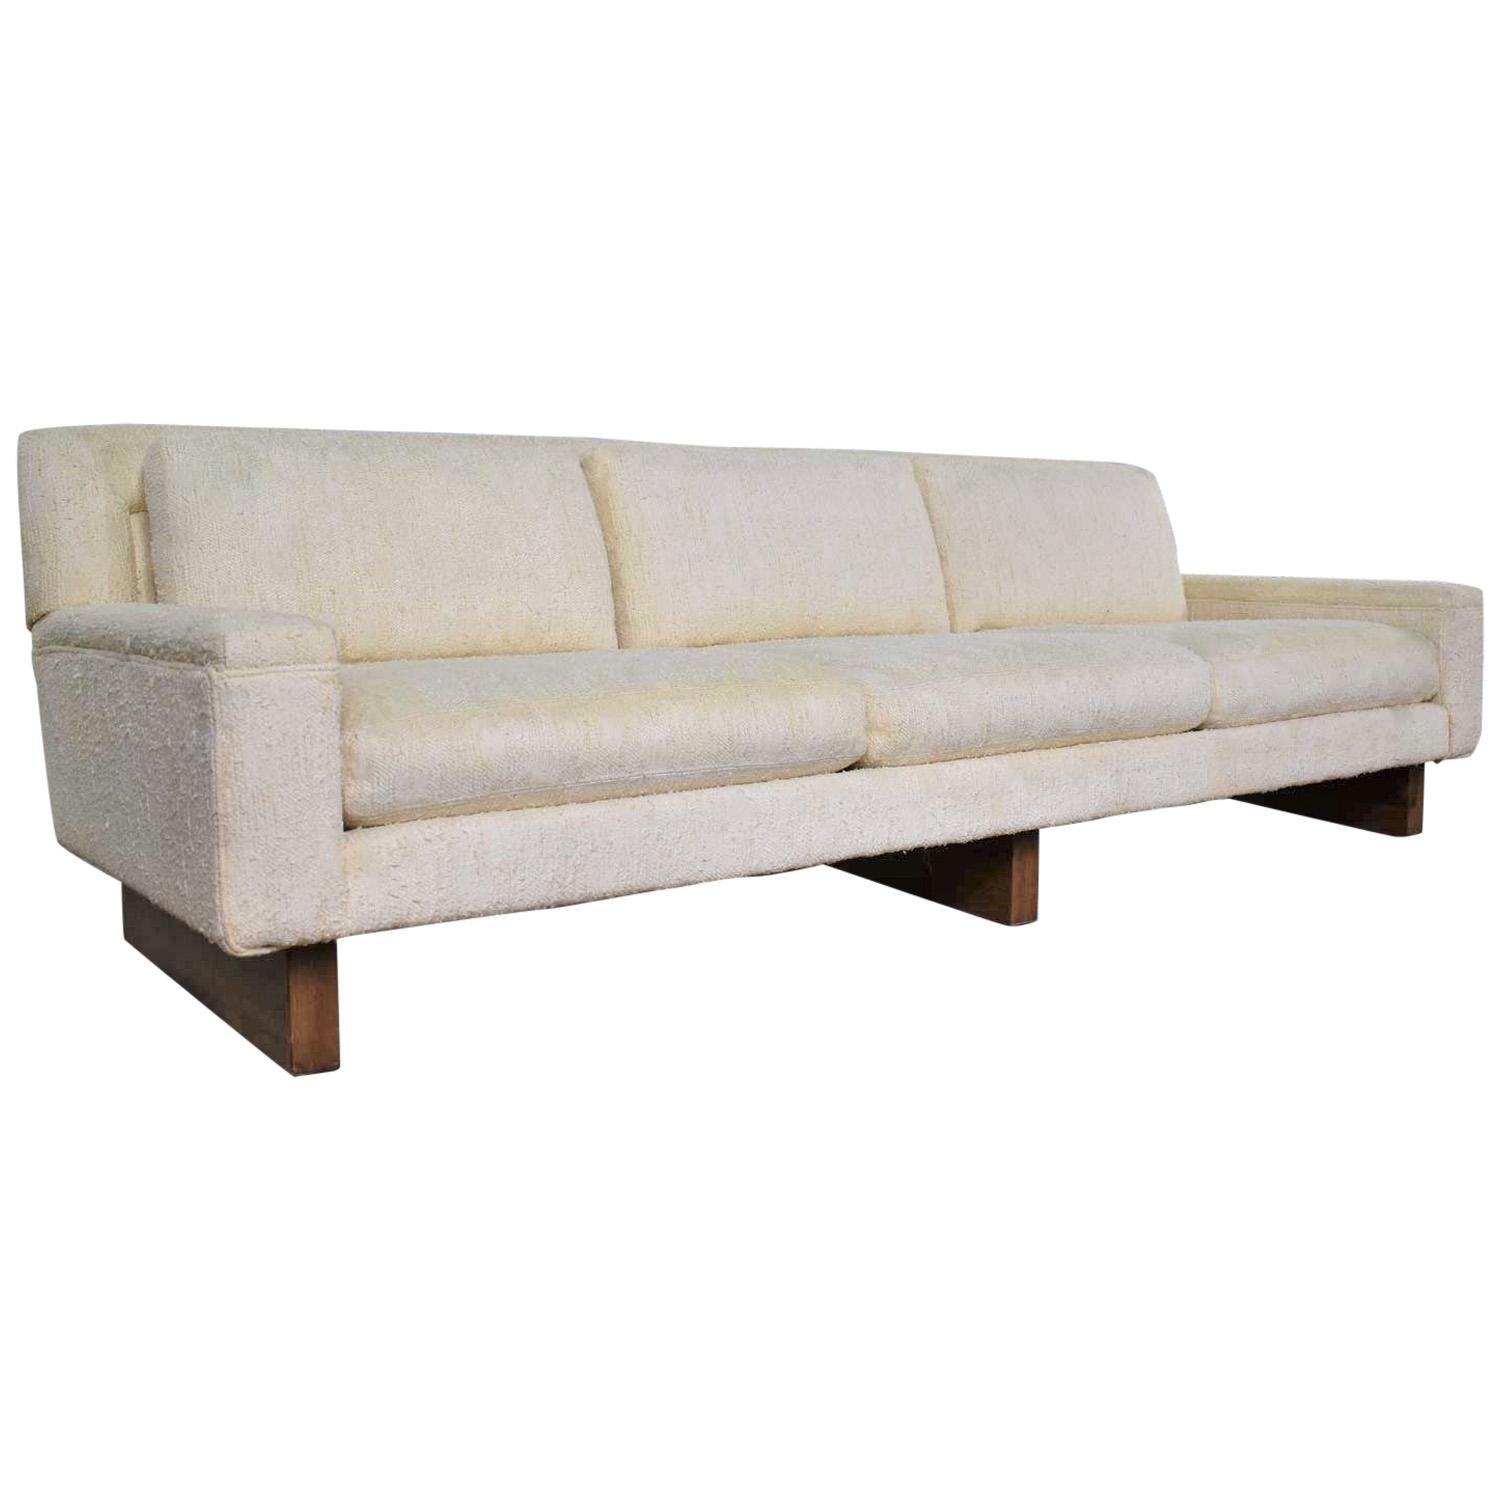 Mid-Century Modern Lawson Style White Sofa by Flair Division for Bernhardt